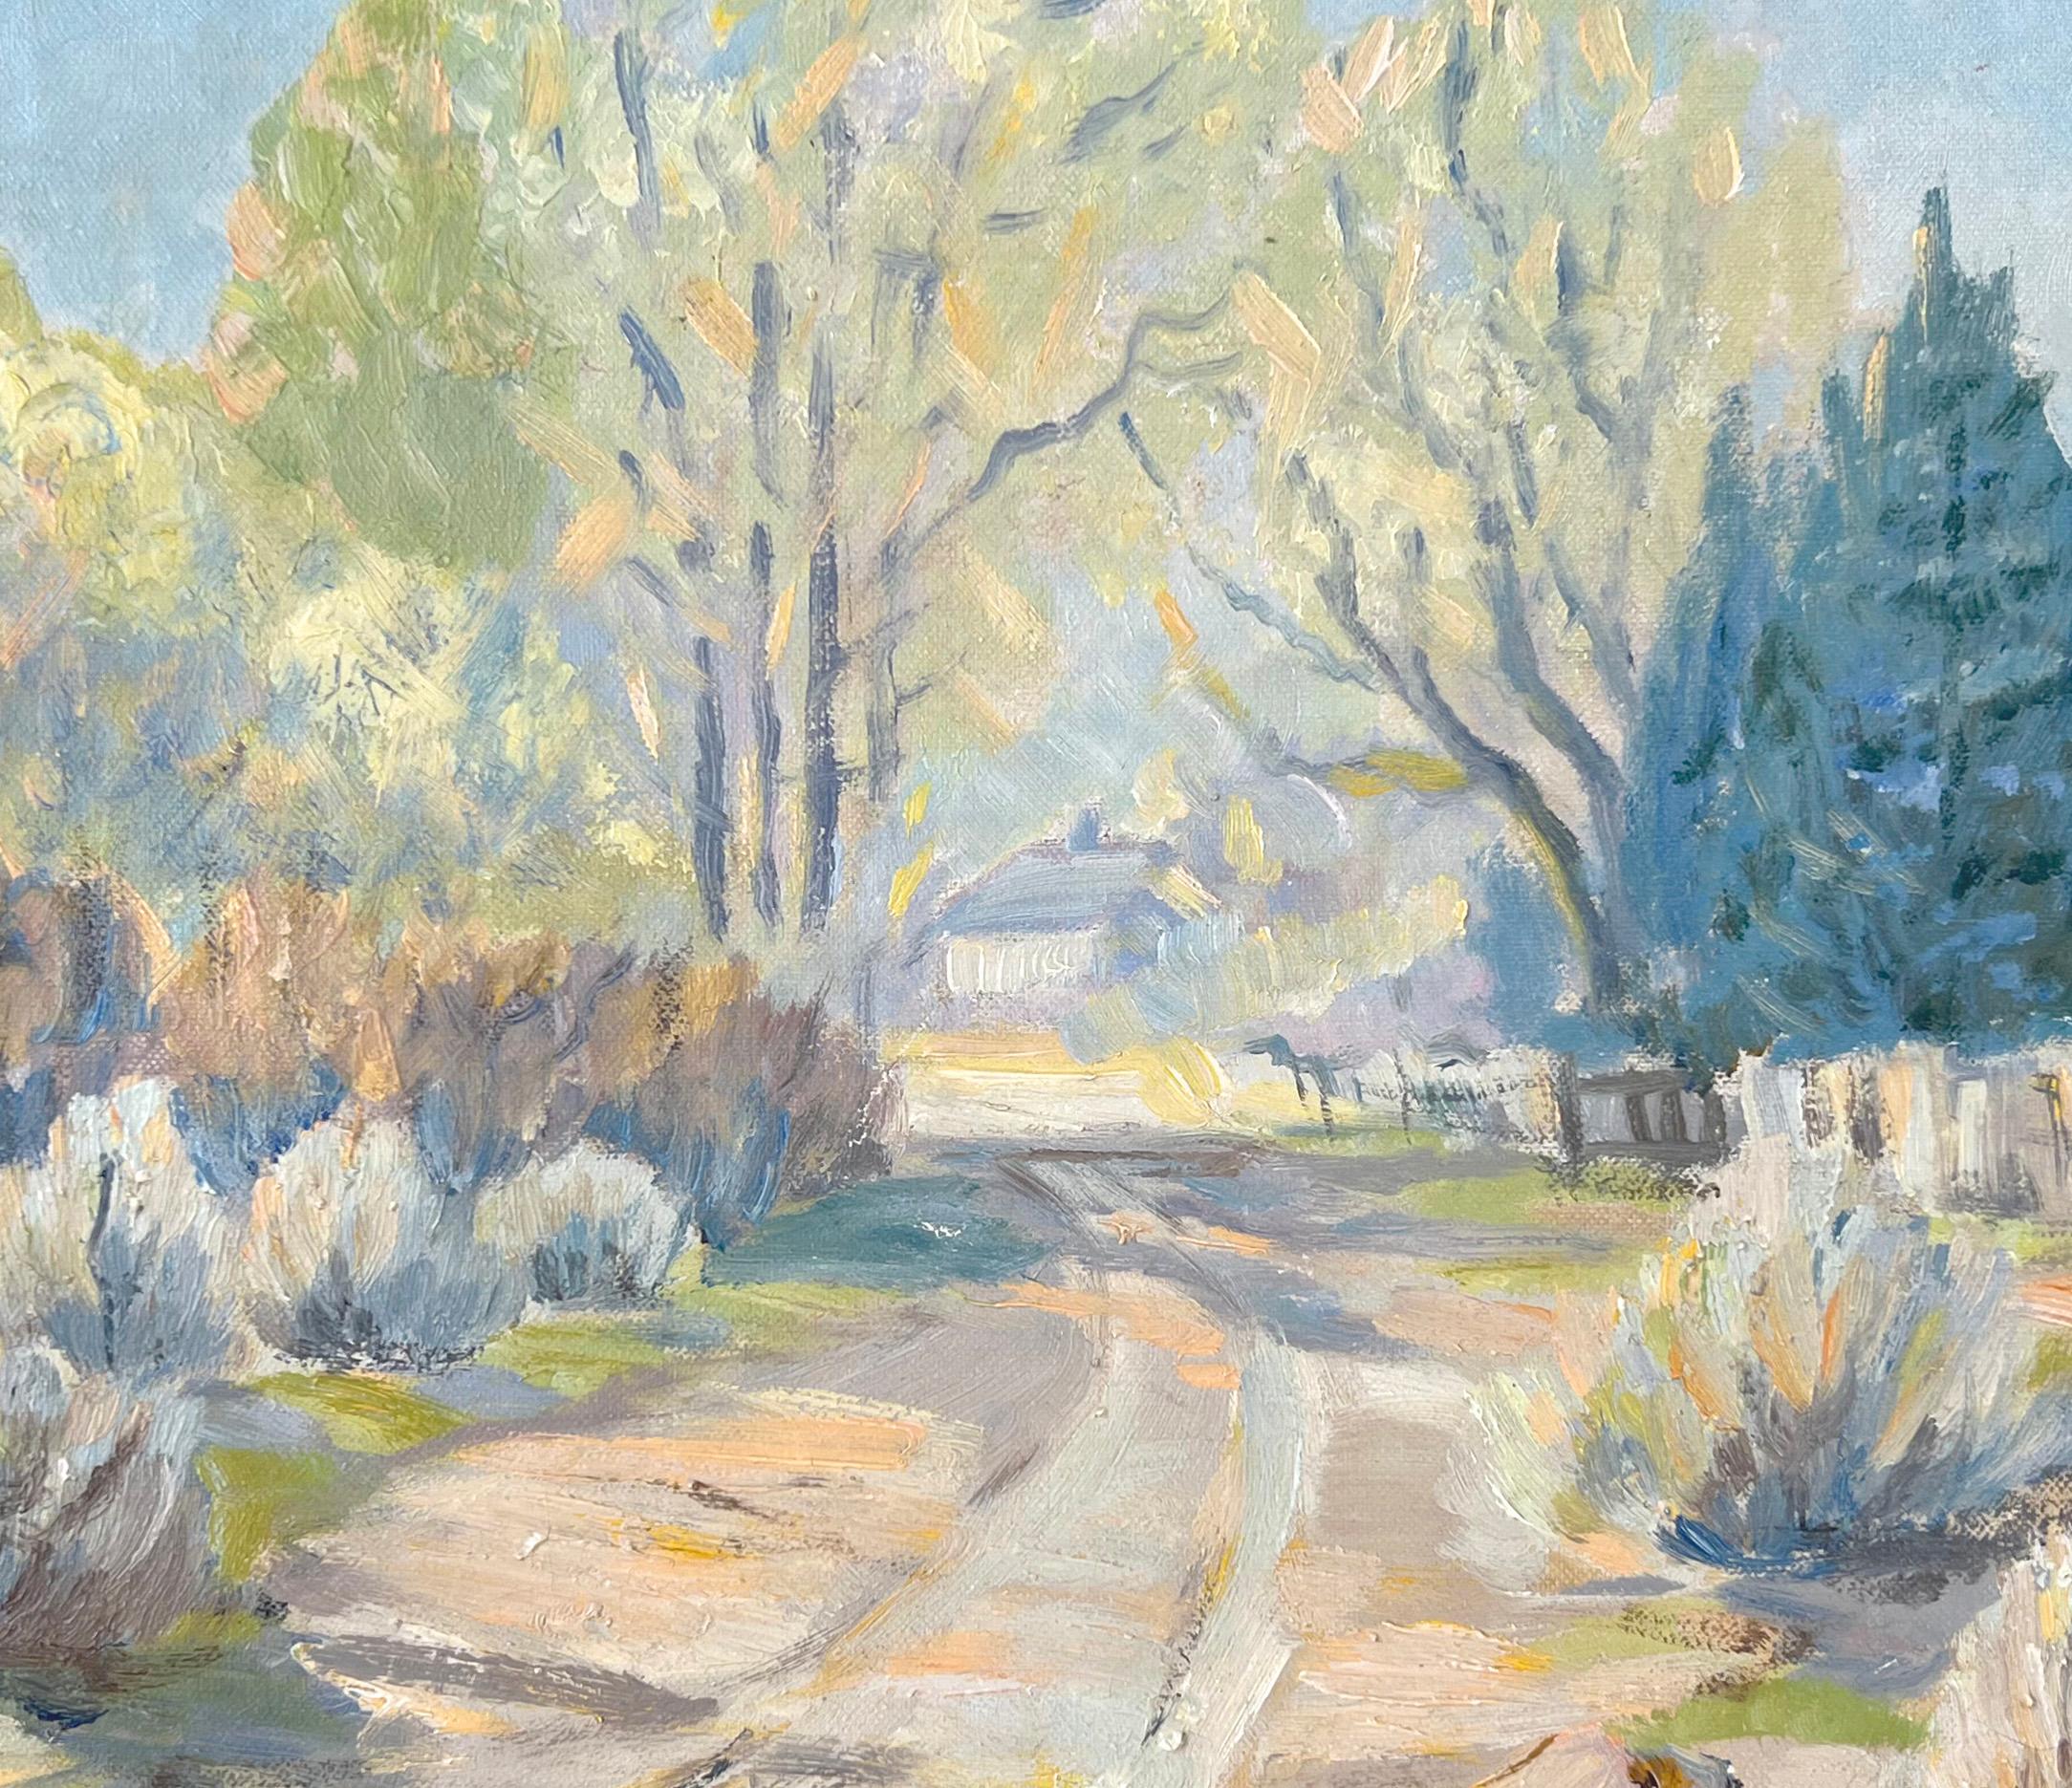 California School - Desert Ranch Road Landscape Oil on Canvas - Painting by Unknown